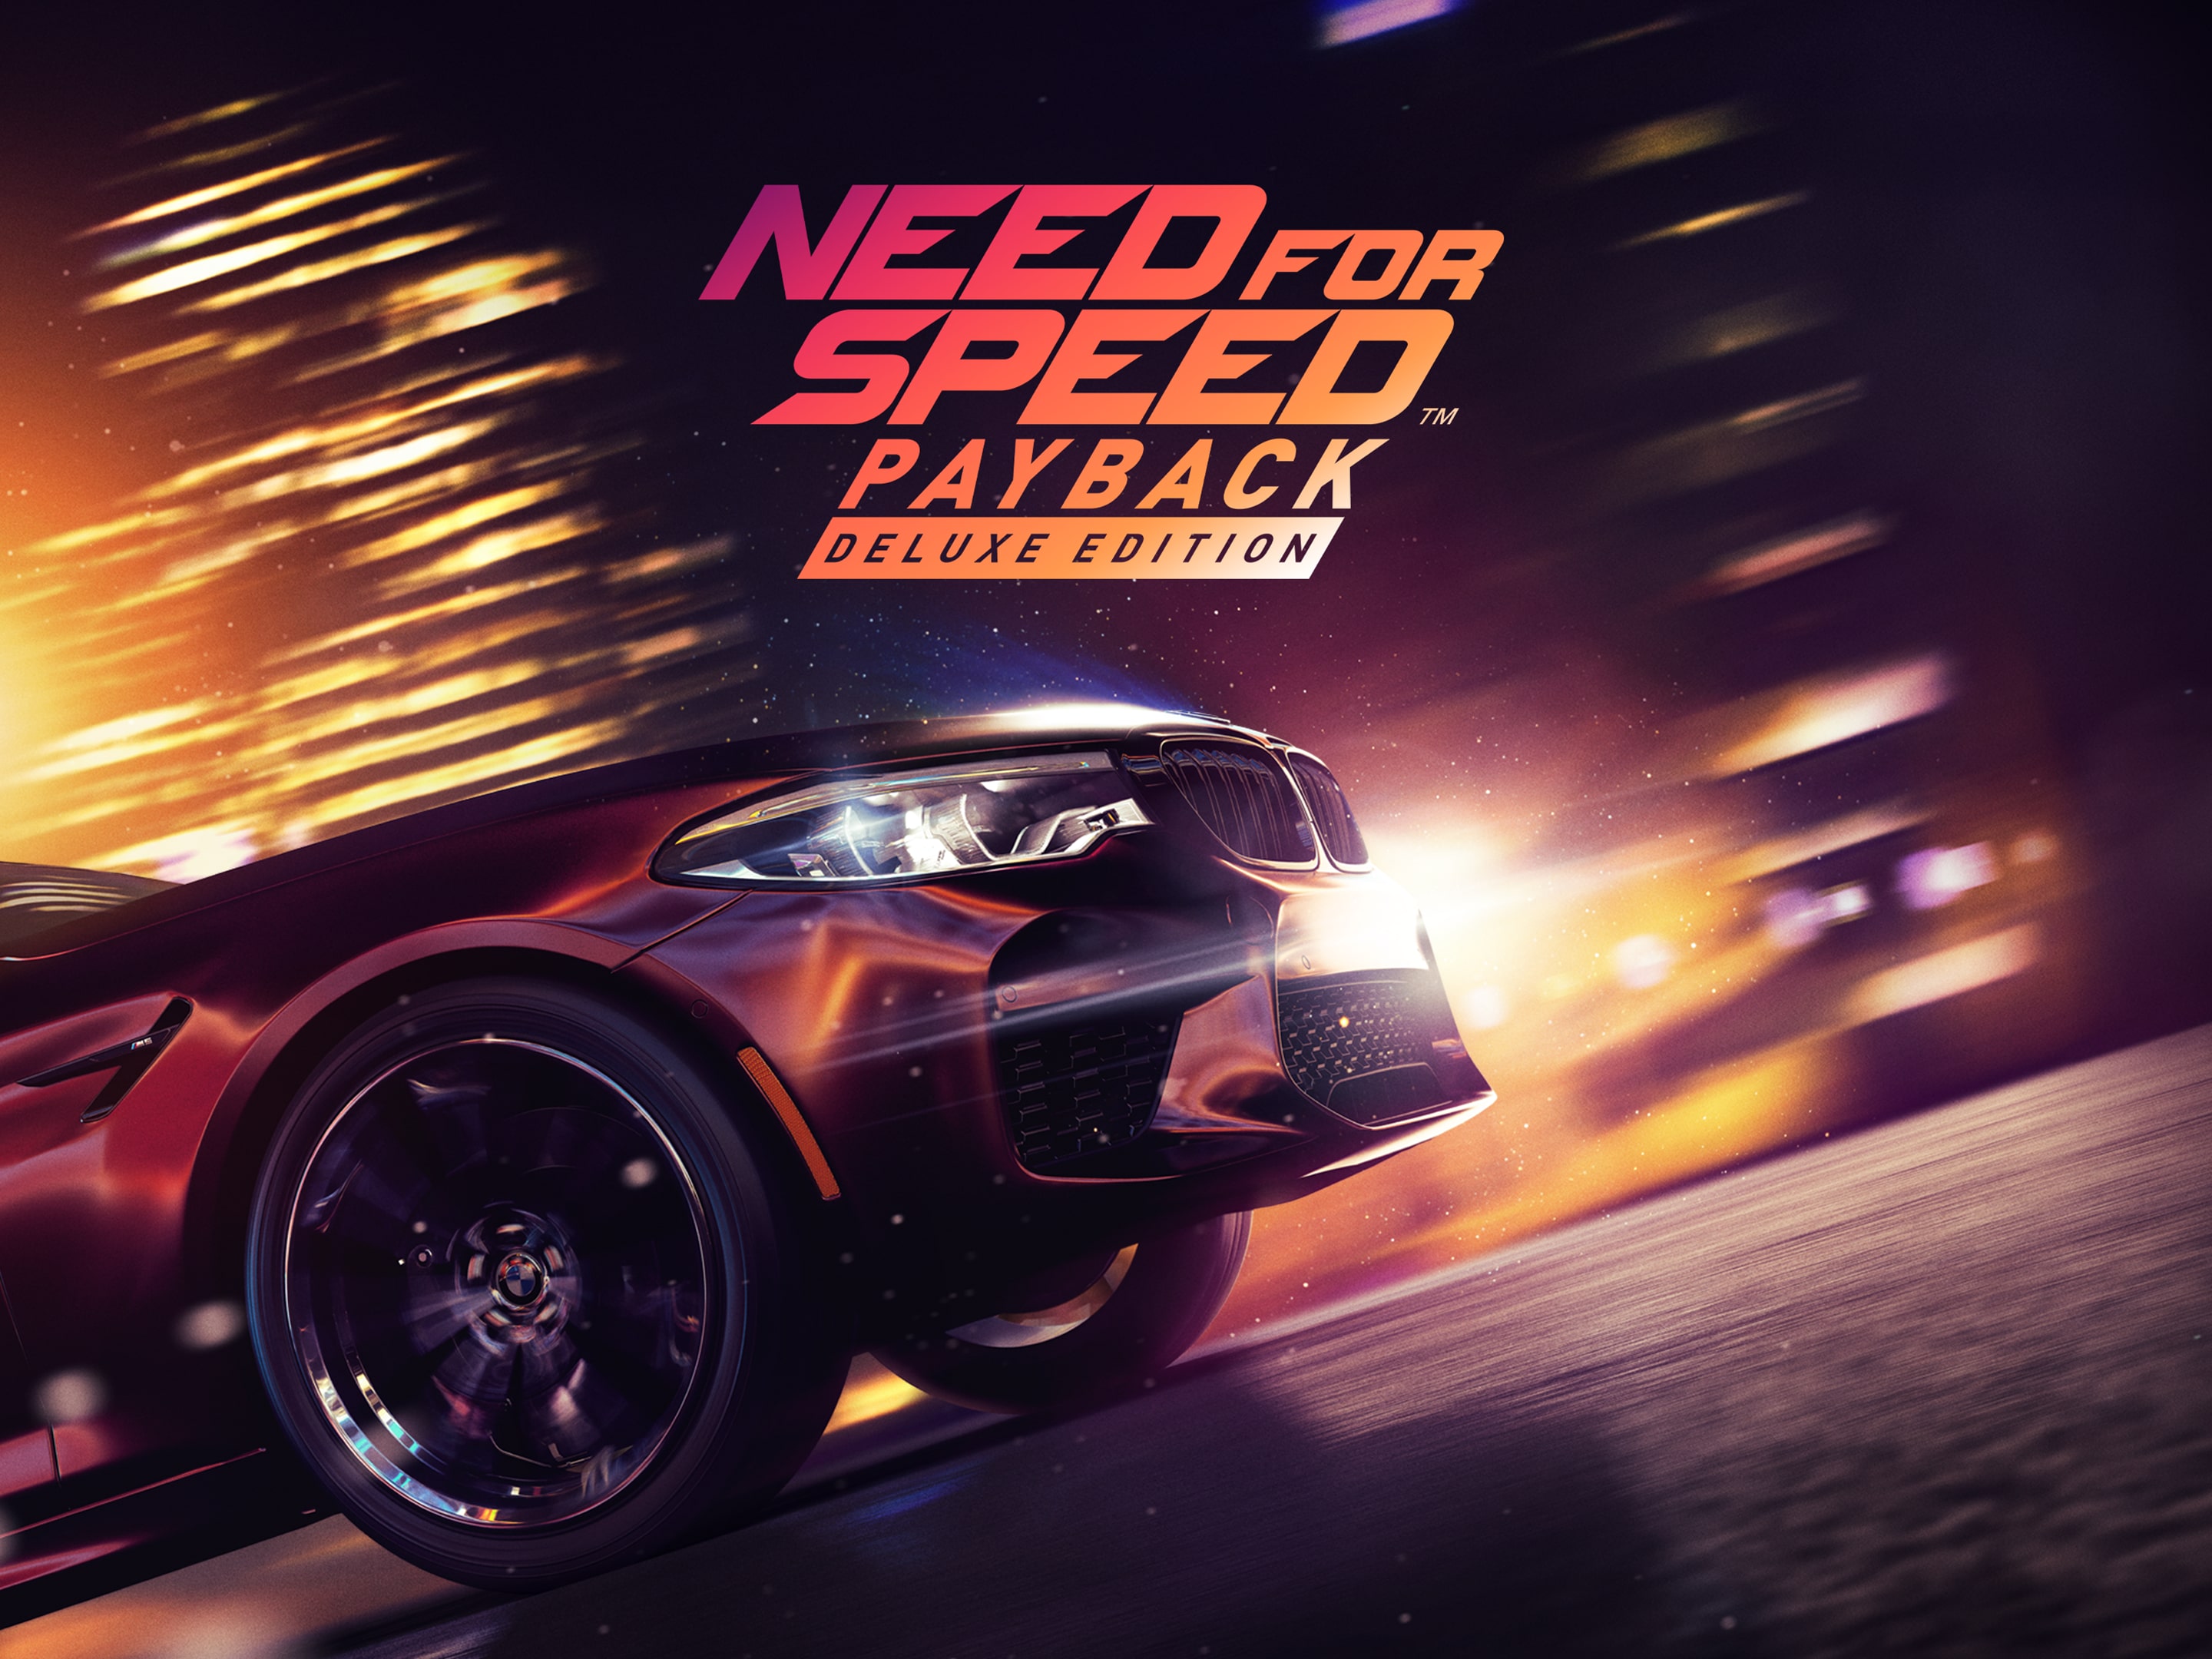 Need for Speed Payback (ps4). Need for Speed Payback пс4. Нфс пейбек ПС 3.